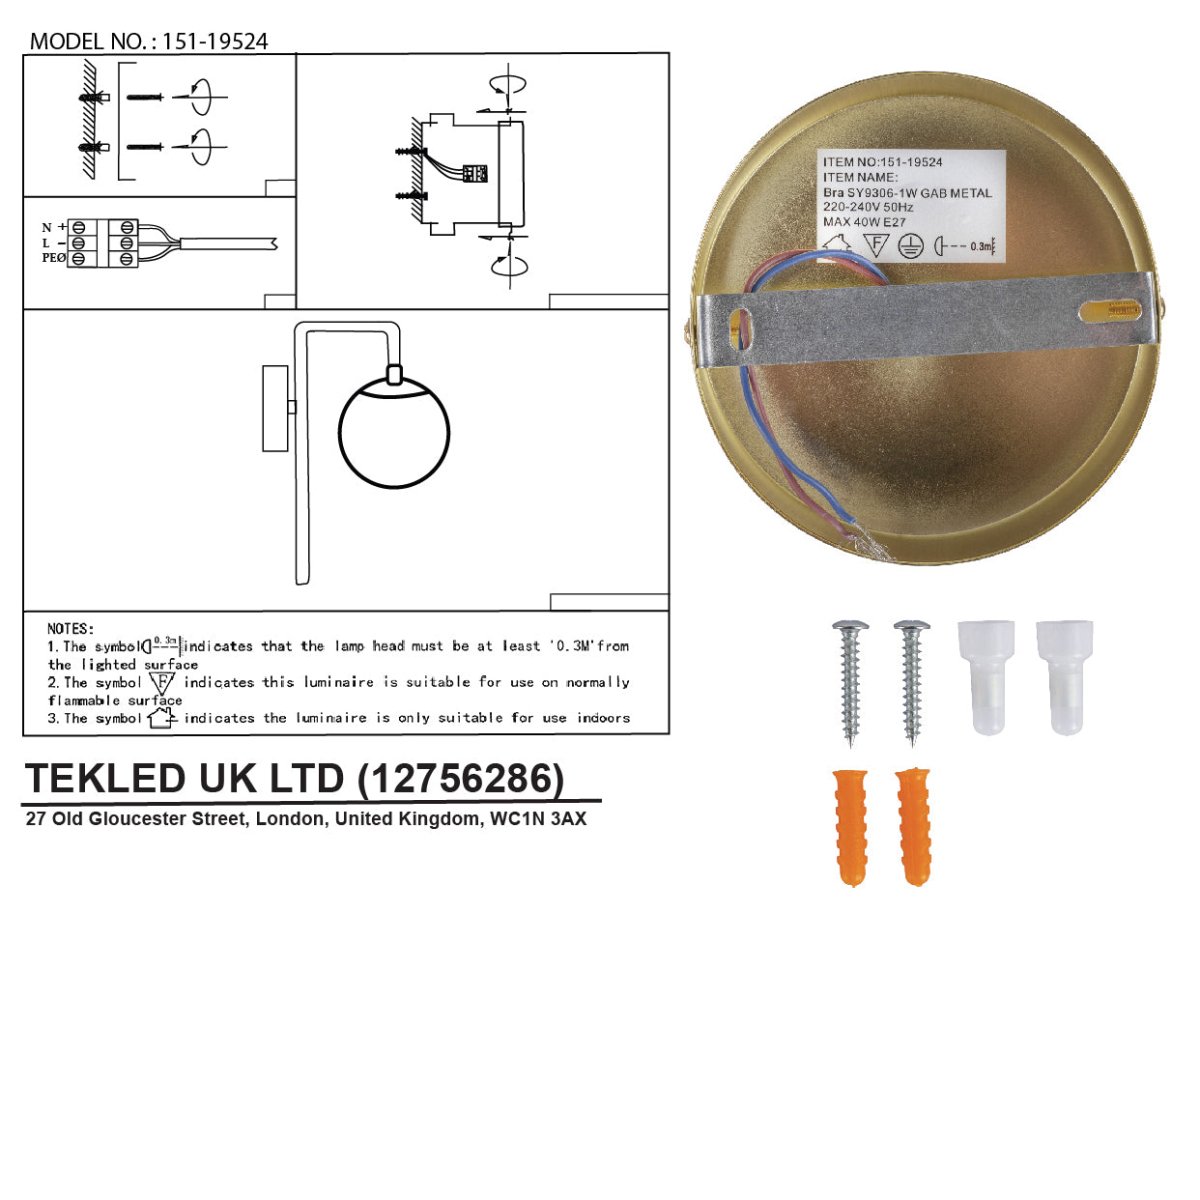 User manual for Opal Globe Glass Bronze Cane Metal Downward Wall Light with E27 Fitting | TEKLED 151-19524